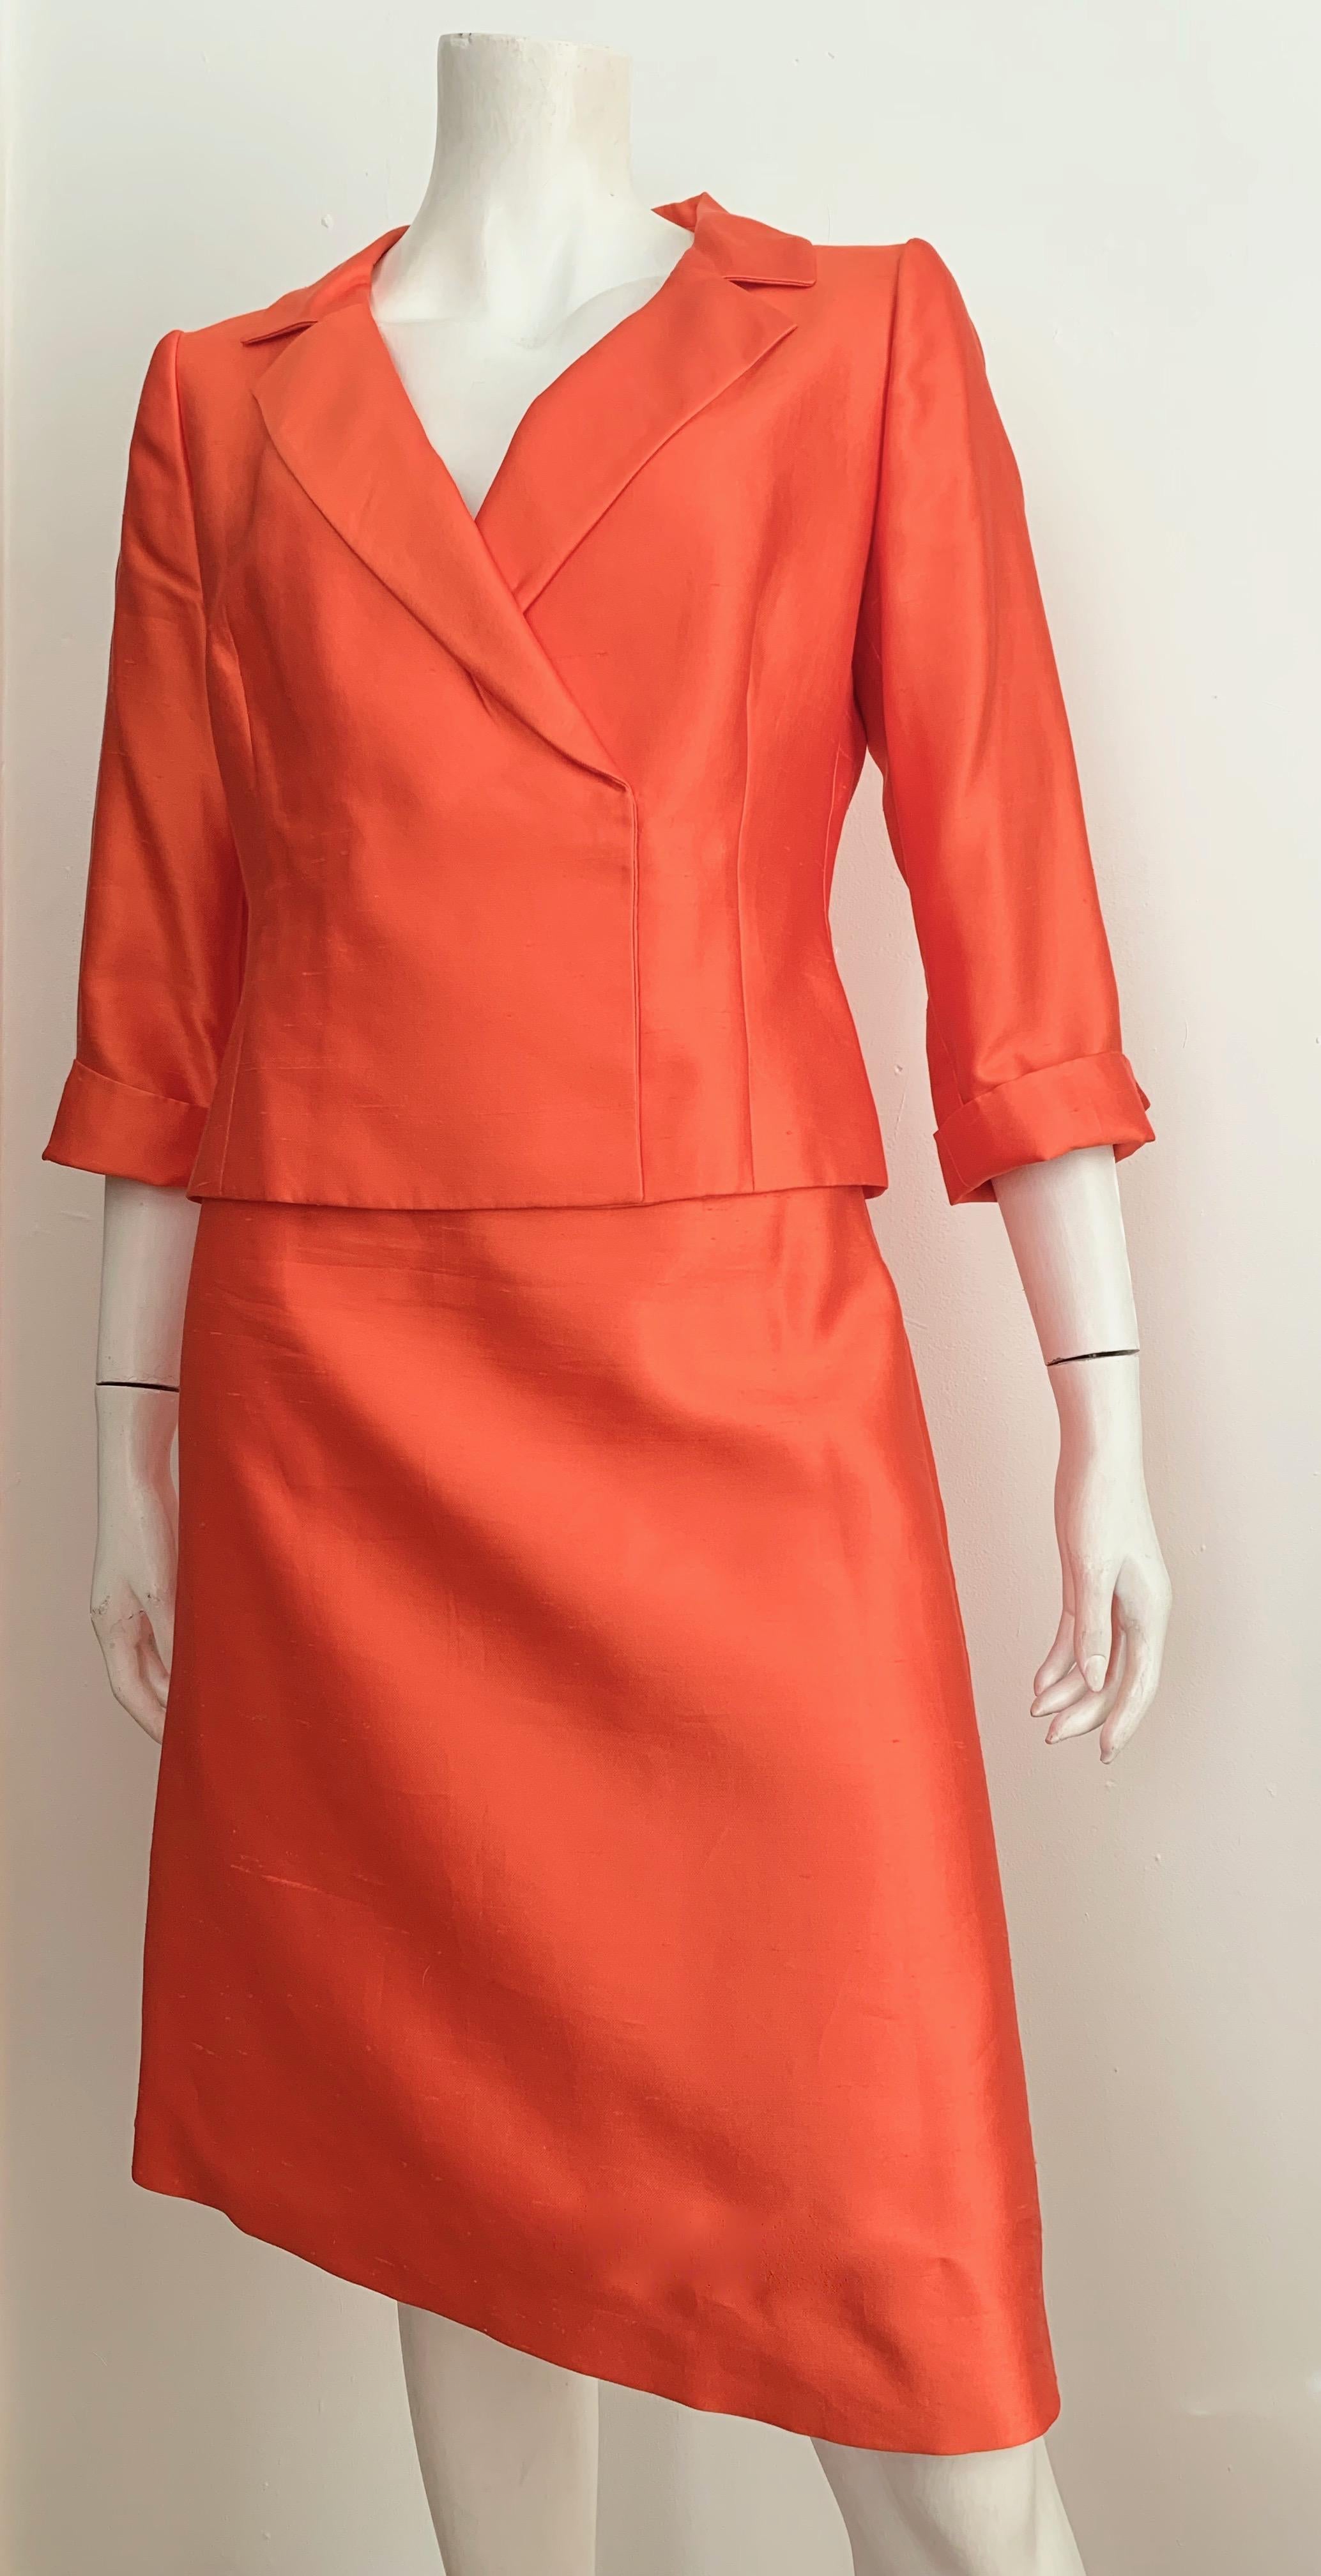 Valentino silk & cotton blend orange jacket & skirt suit is a size 10.
Jacket is beautifully lined.
No shoulder pads.
Skirt is lined with side zipper.
Worn together as suit set or broken up either way this is a stunning classic design.
Wear the